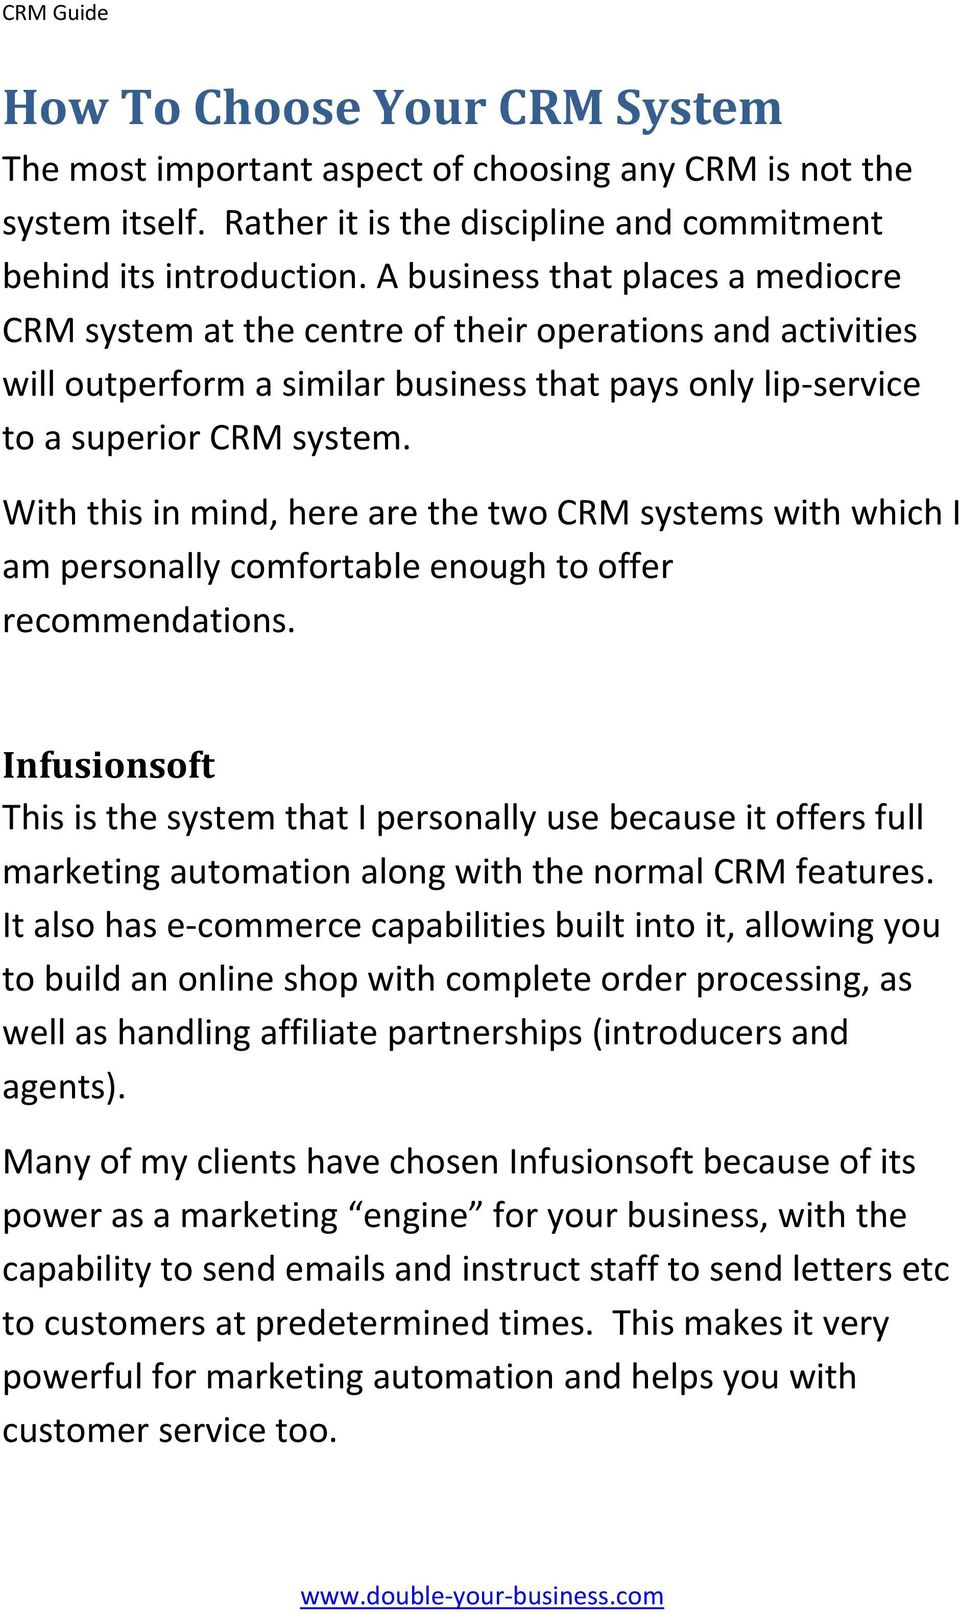 With this in mind, here are the two CRM systems with which I am personally comfortable enough to offer recommendations.